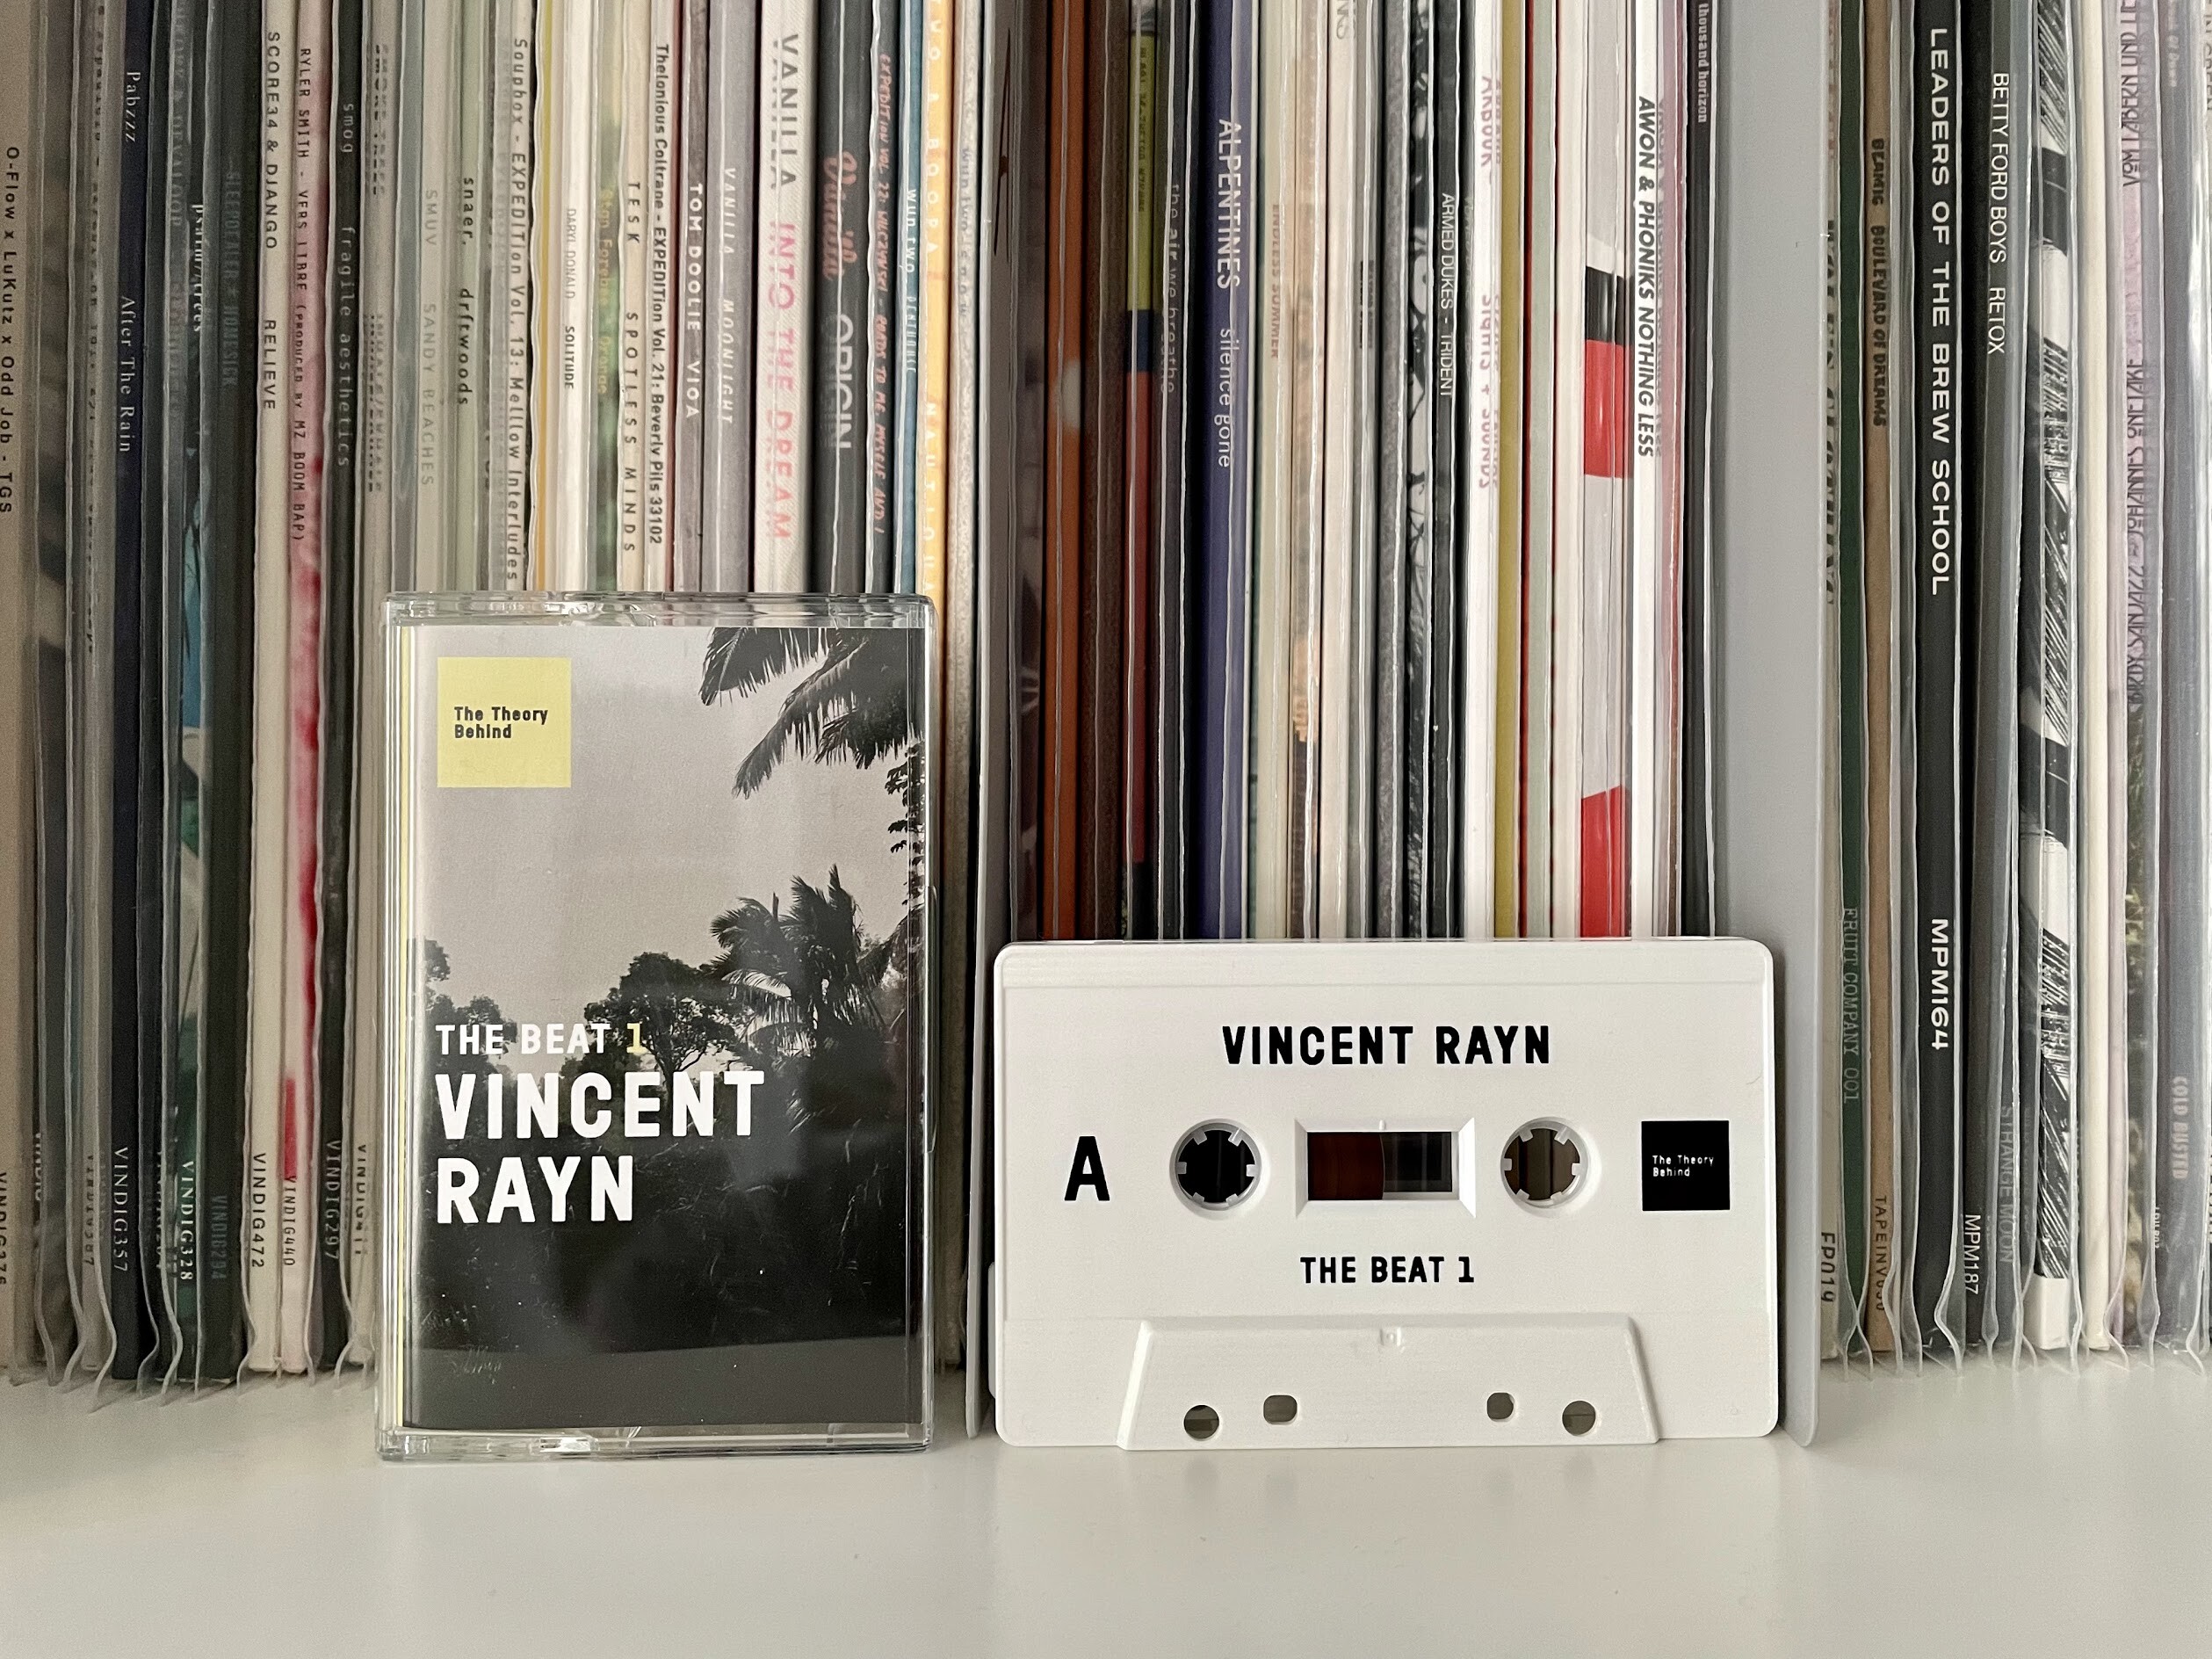 Vincent Rayn - The Beat 1 (The Theory Behind)